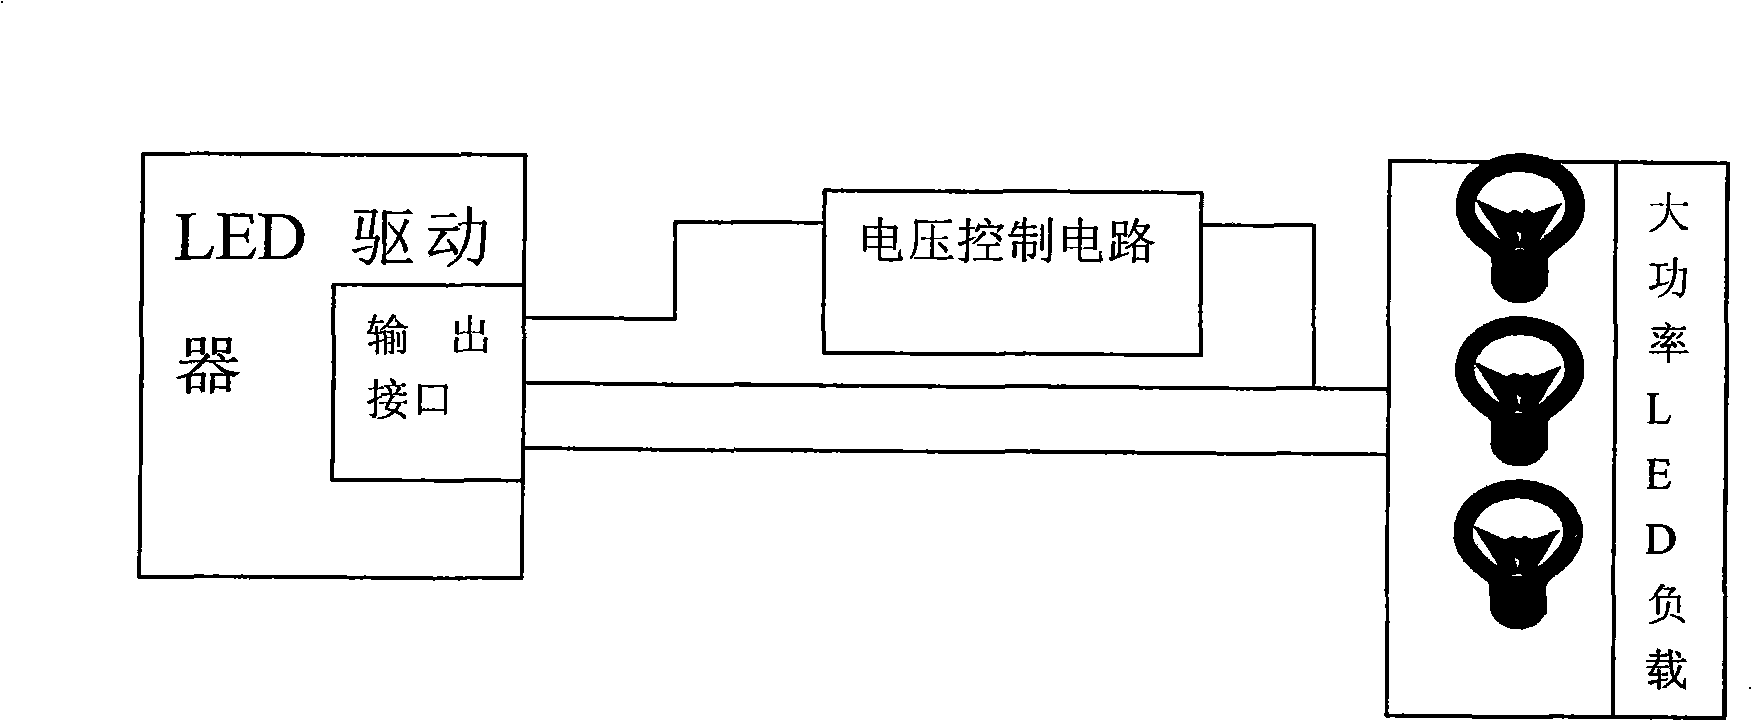 Three-wire system high-power LED driver